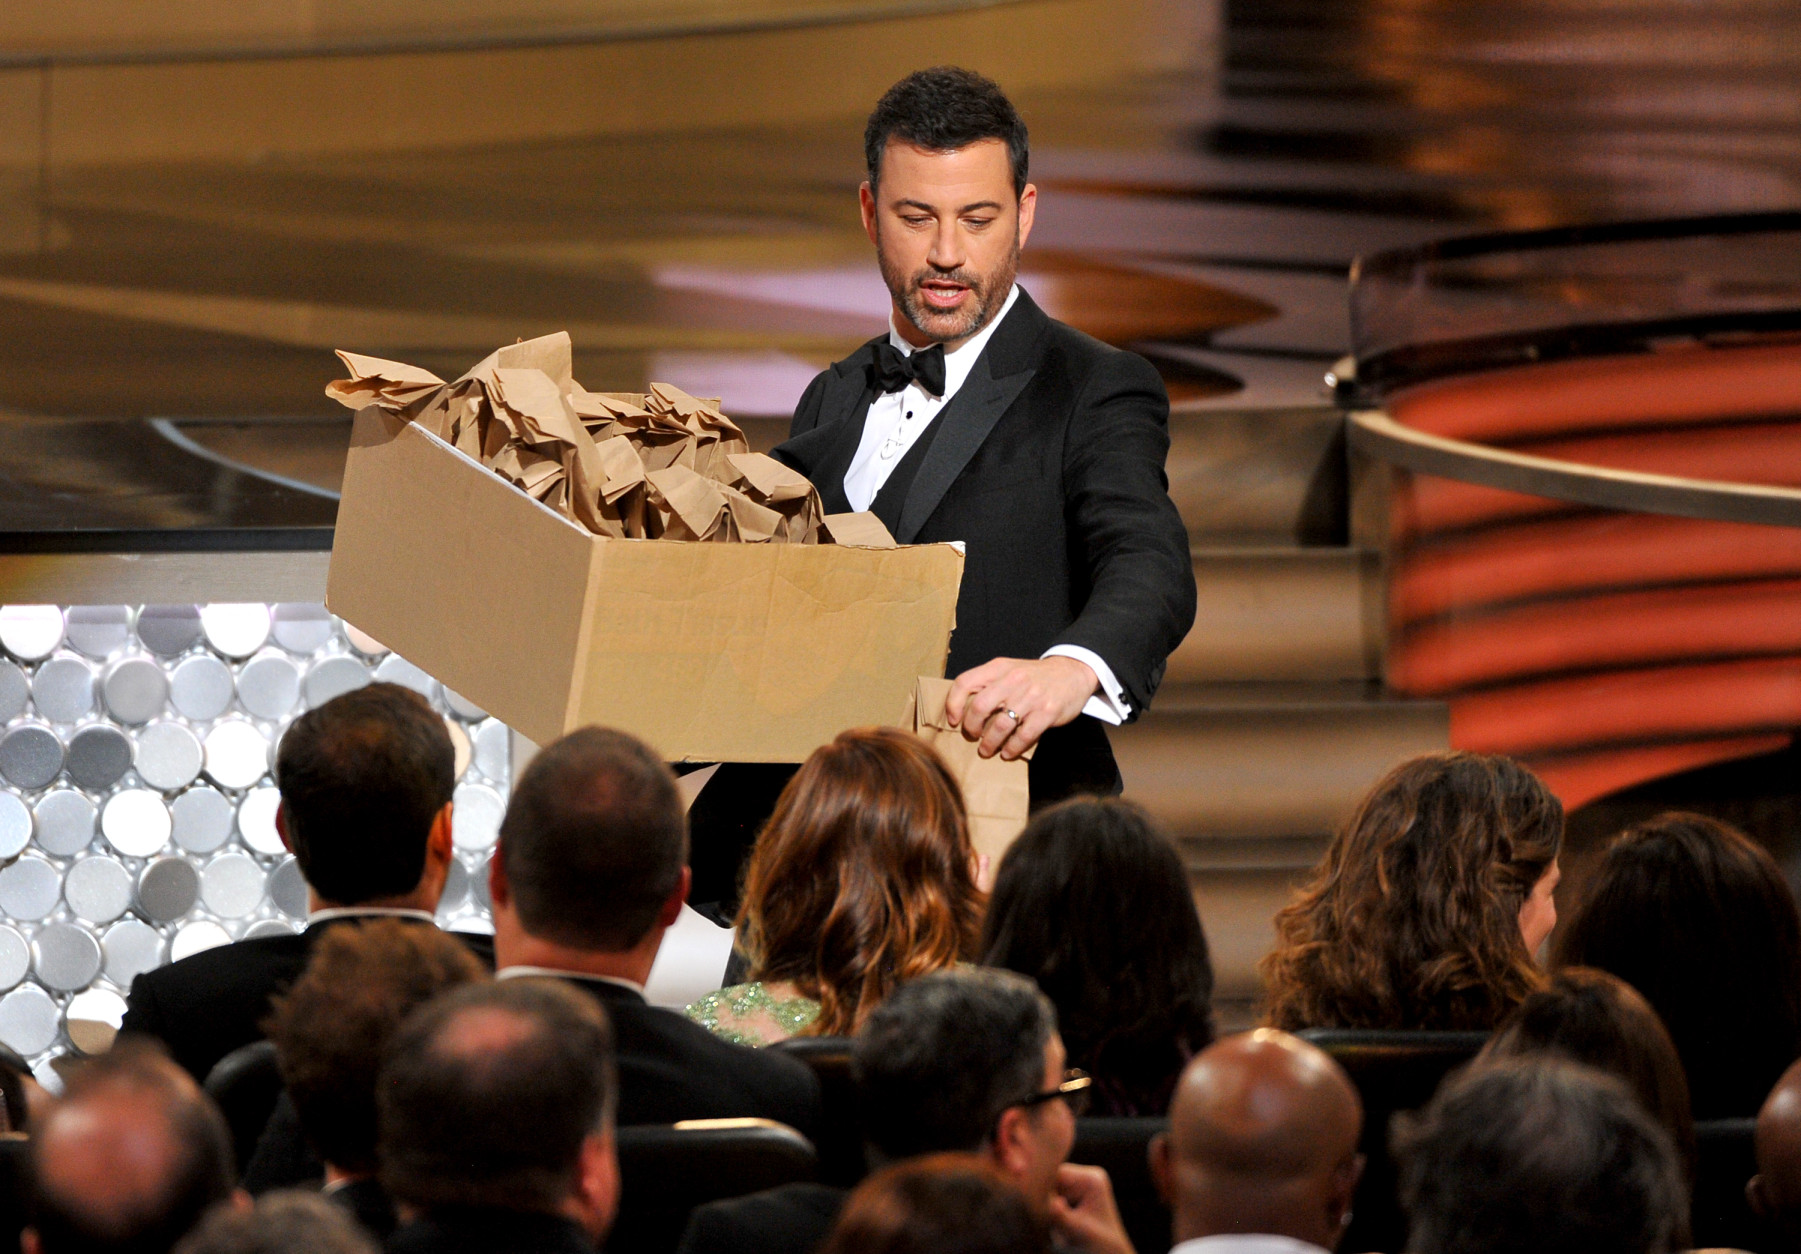 Host Jimmy Kimmel hands out peanut butter and jelly sandwiches at the 68th Primetime Emmy Awards on Sunday, Sept. 18, 2016, at the Microsoft Theater in Los Angeles. (Photo by Vince Bucci/Invision for the Television Academy/AP Images)